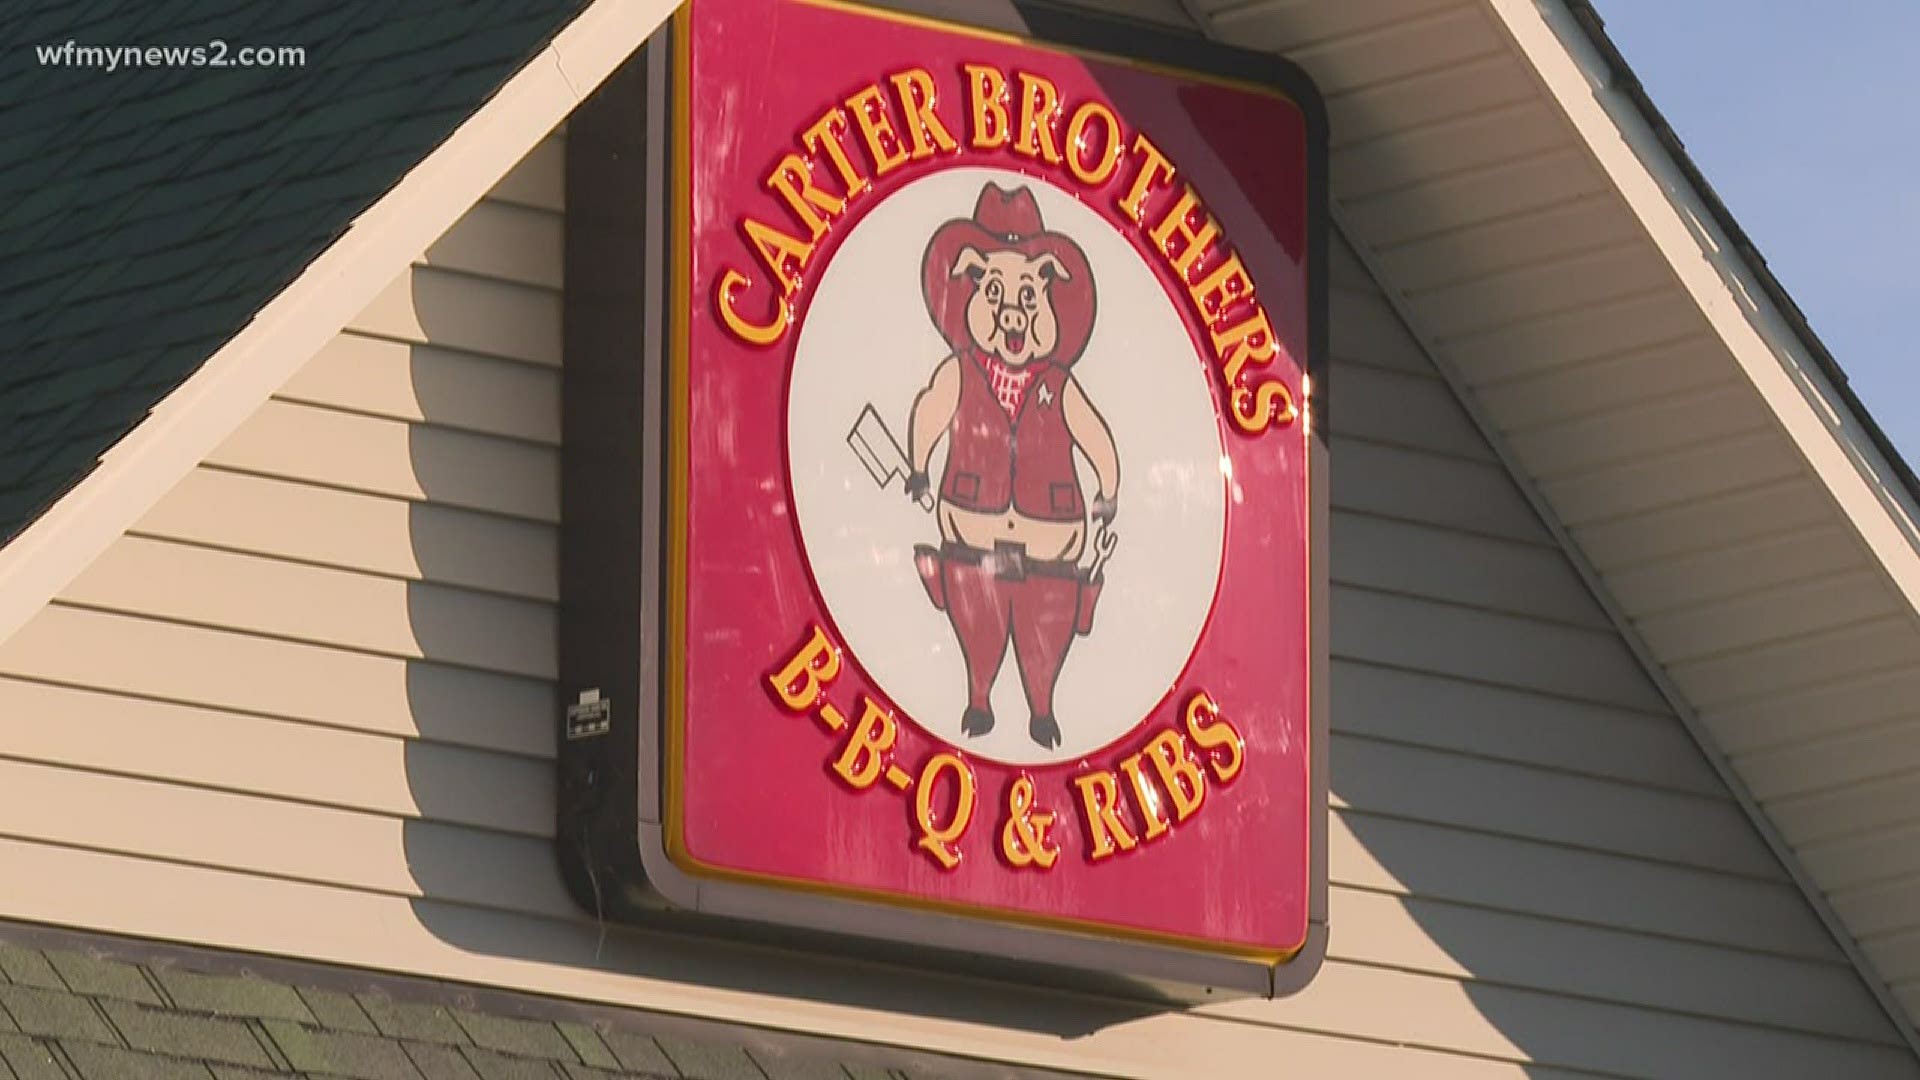 Carter Brothers in High Point is shutting down after nearly 25 years in business.